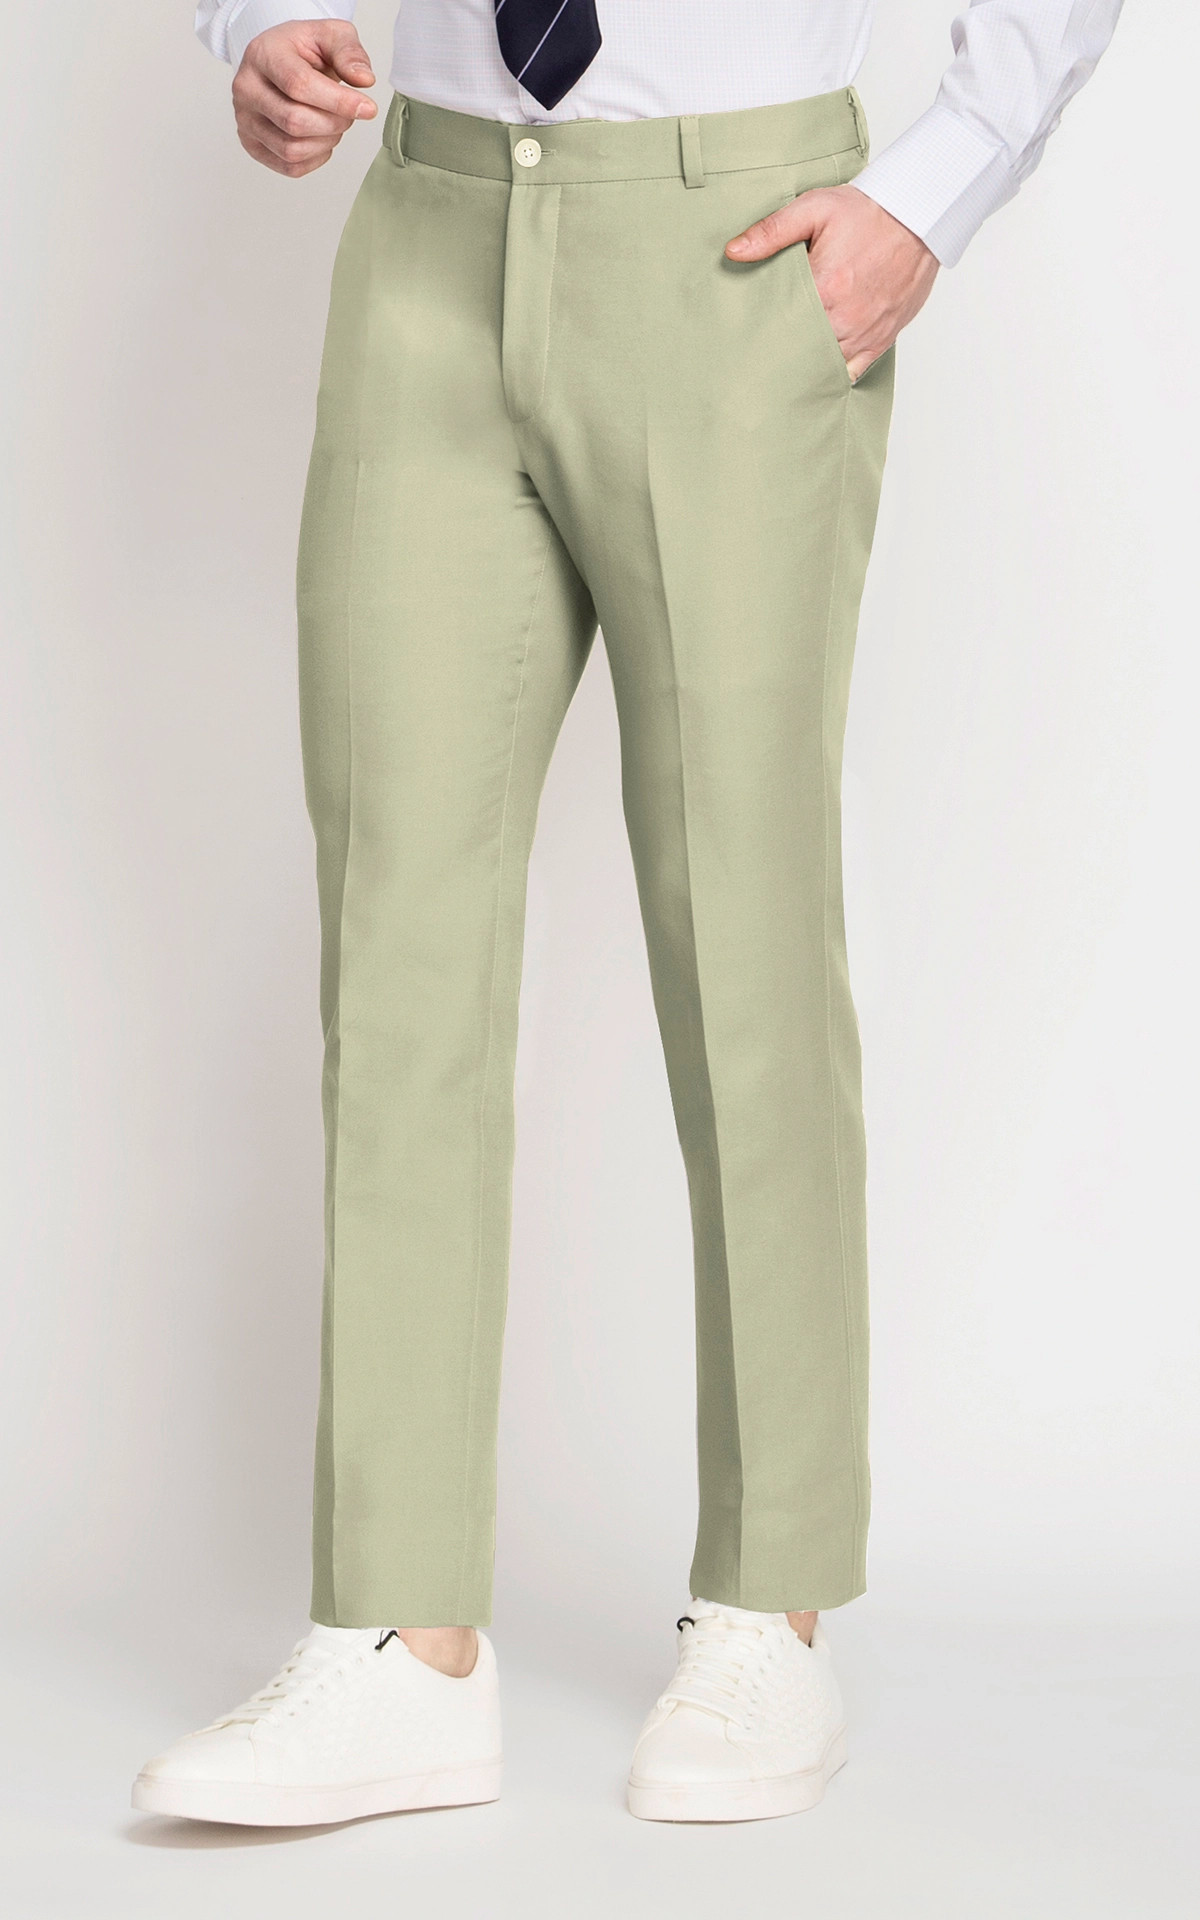 Mens Plaid Business Casual Straight Suit Classic Mens Corduroy Trousers  Trendy Green/Gray/Yellow Jogging Pants From Huiguorou, $20.31 | DHgate.Com